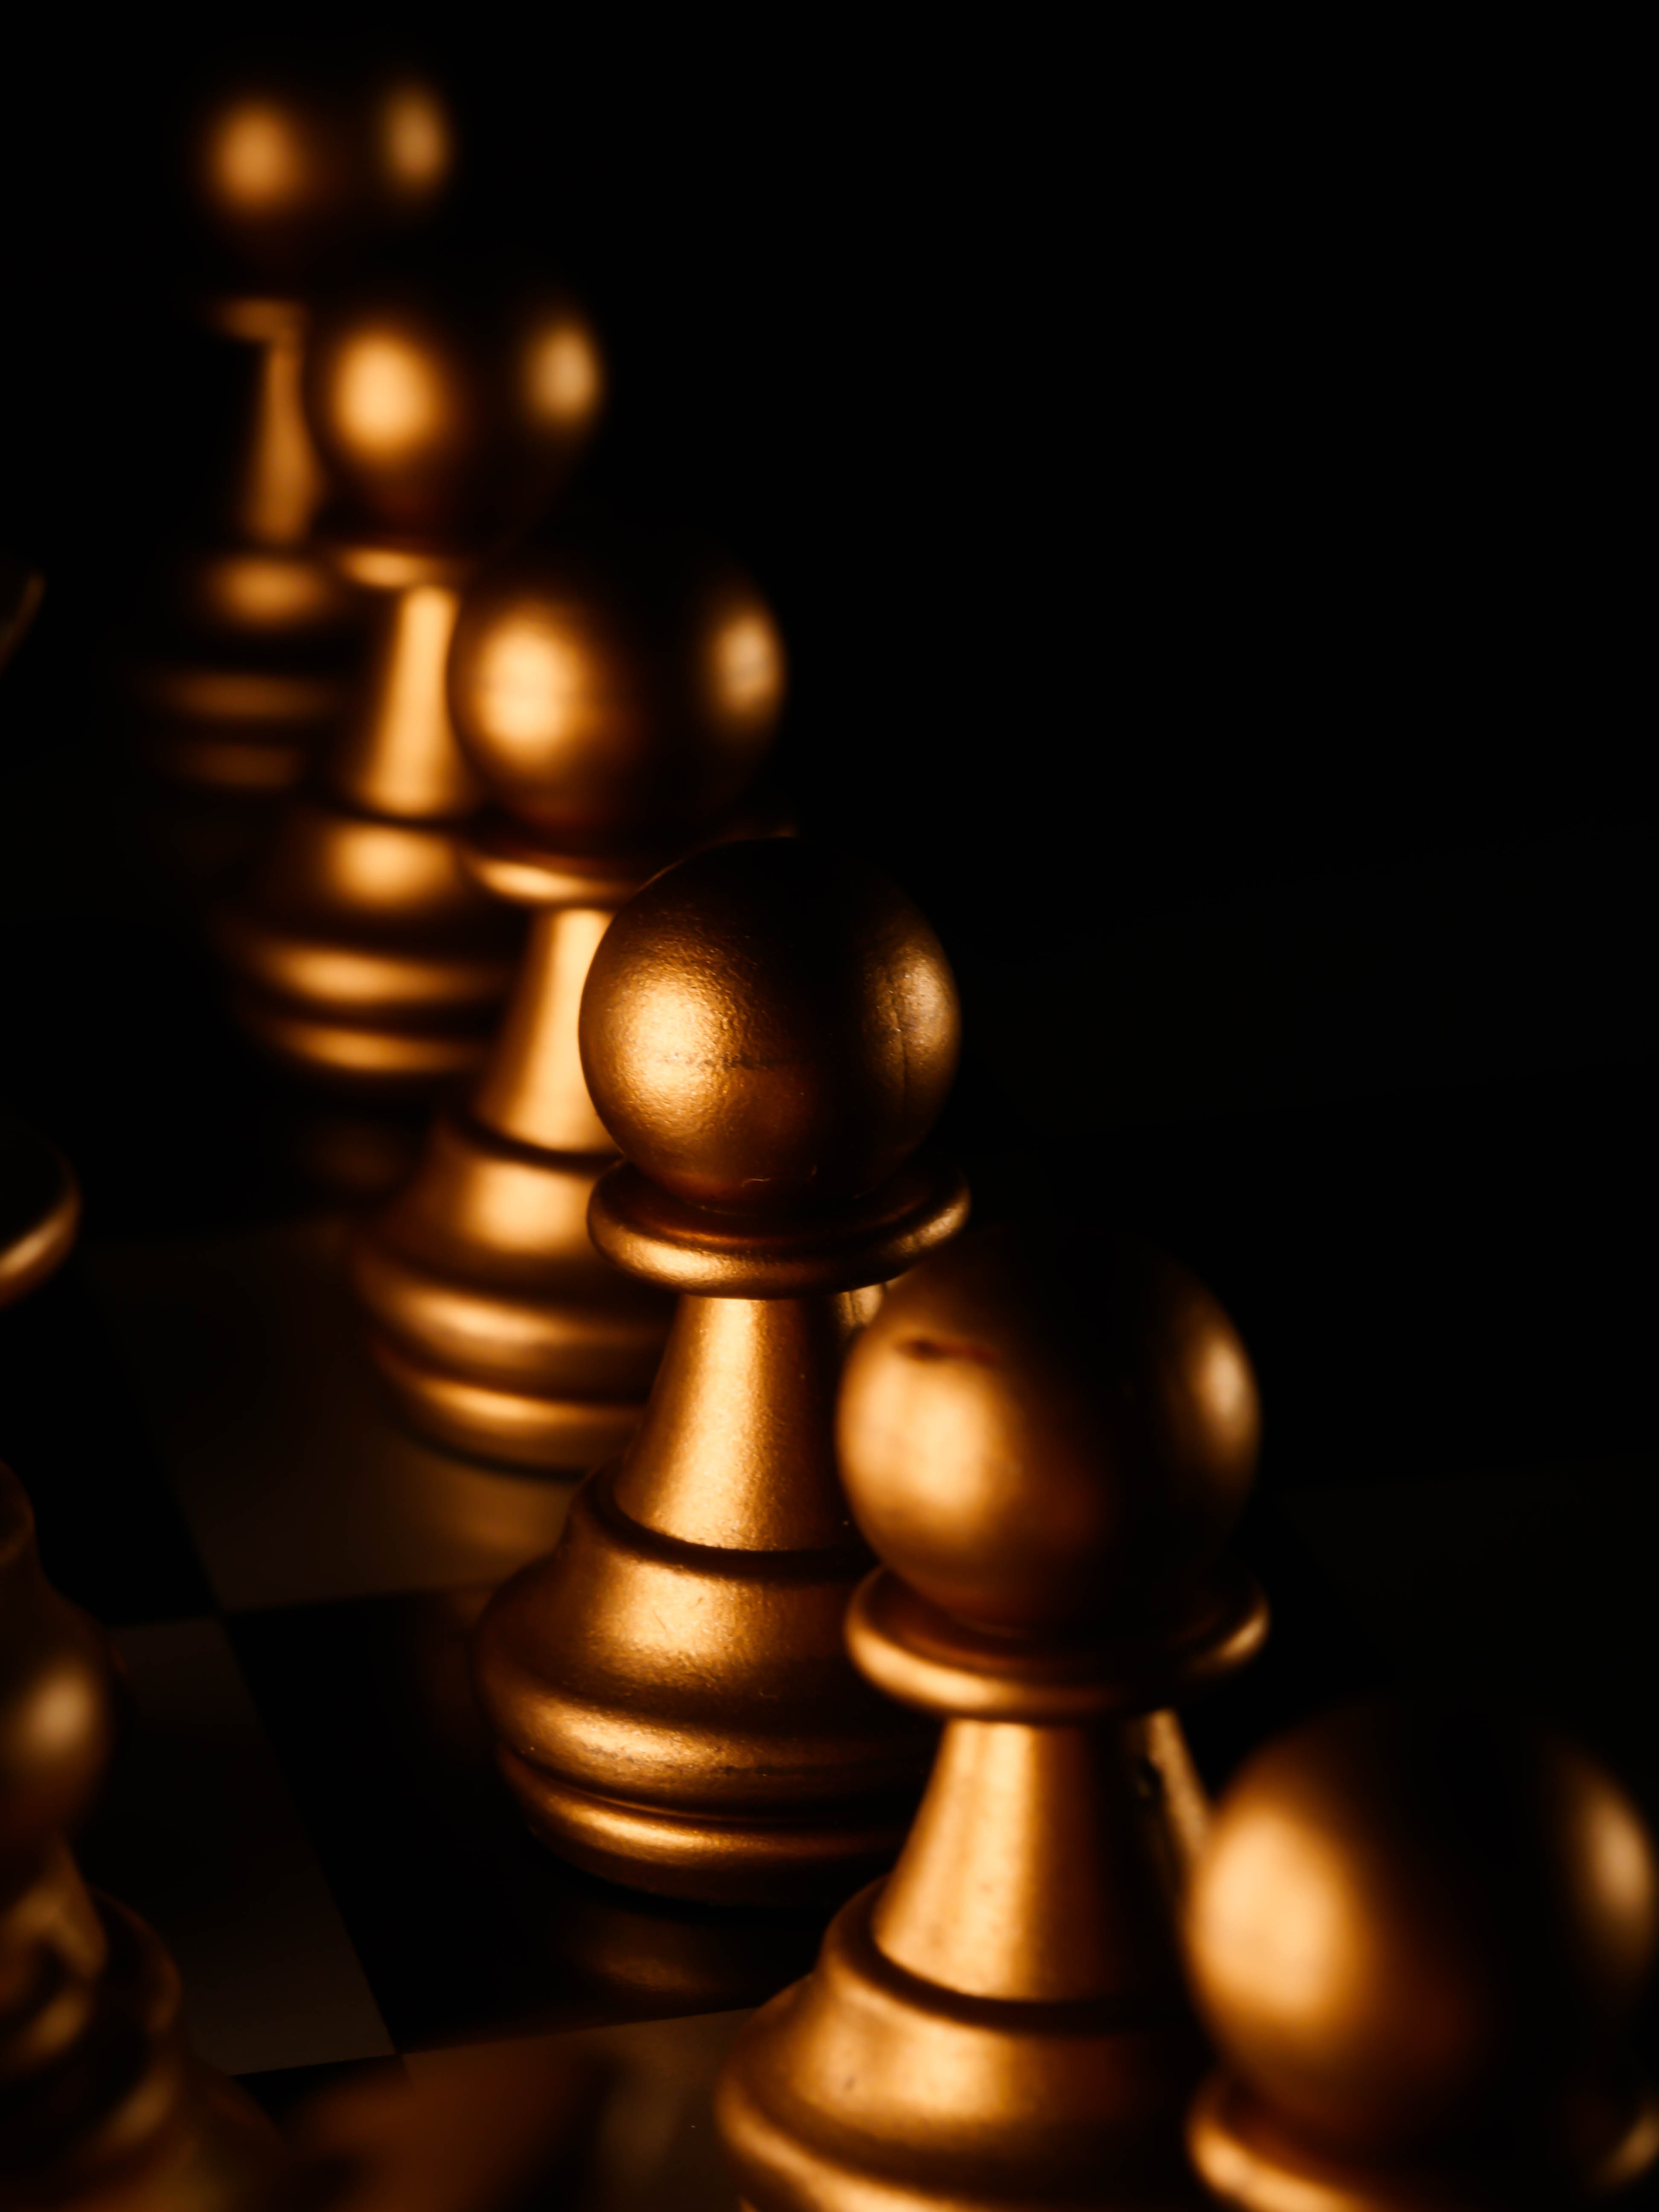 Gold Chess Piece on Black Surface · Free